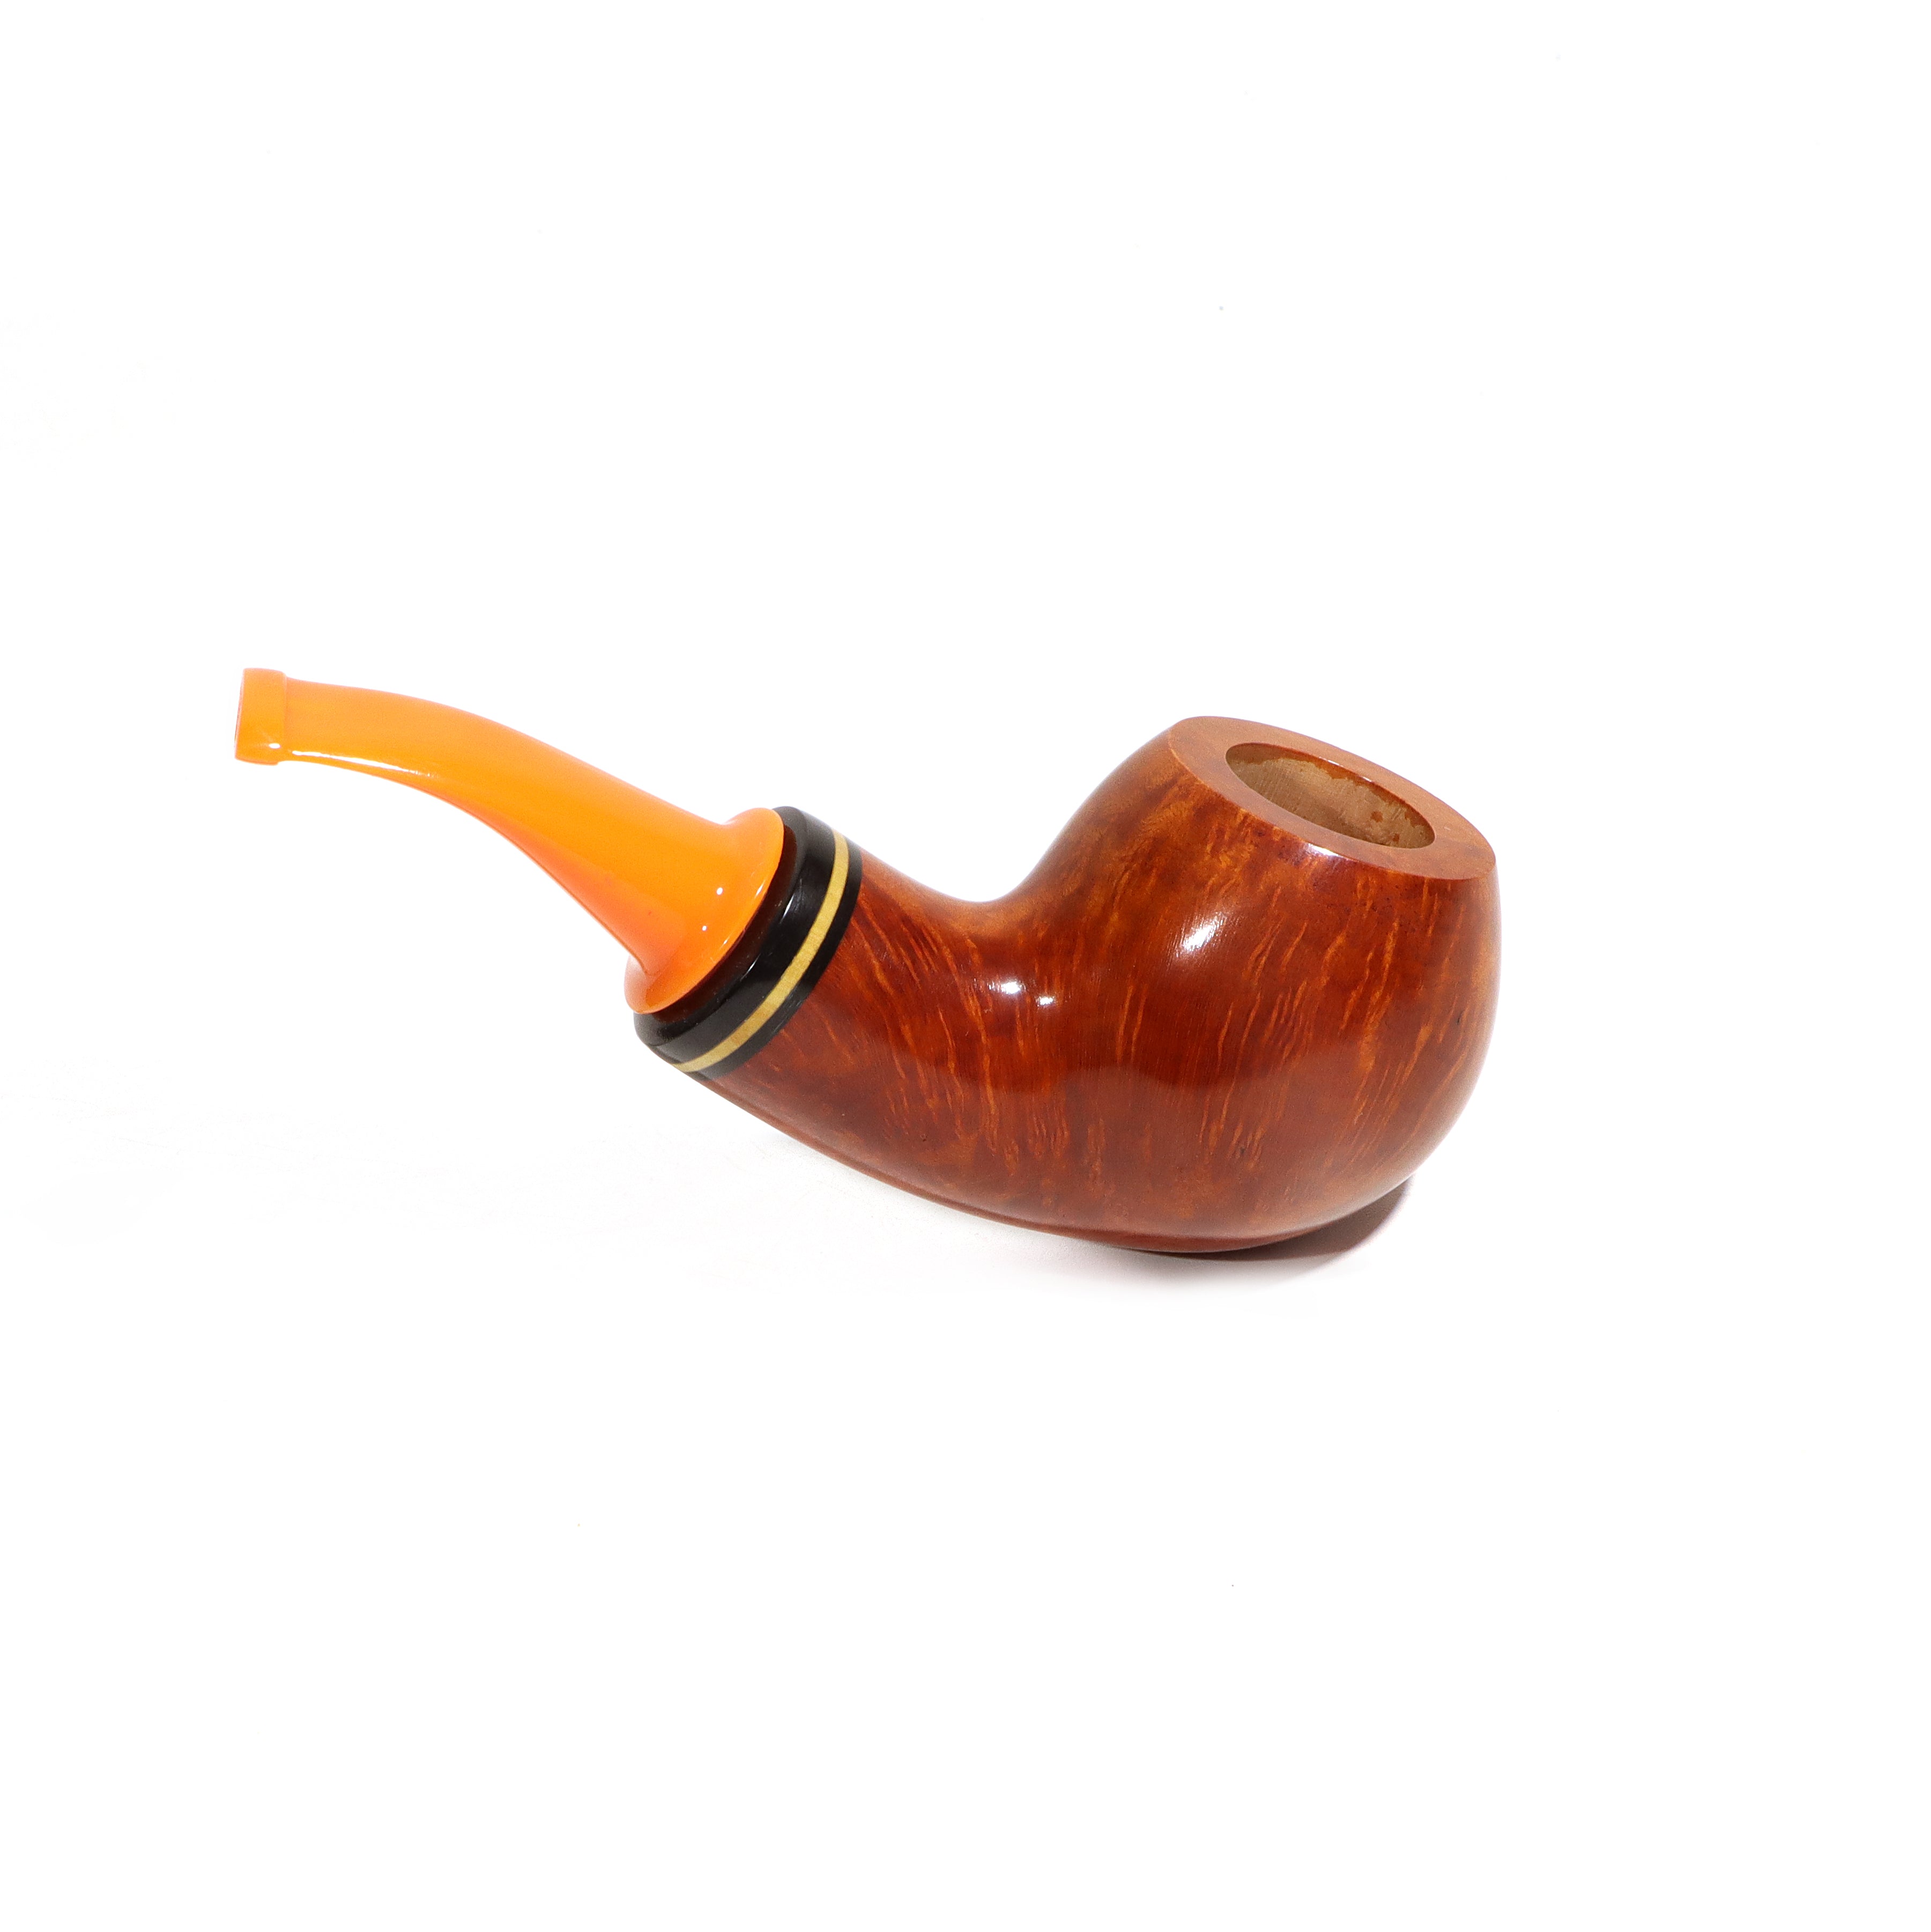 Handmade Briar Wood Tobacco Pipes Hollow Shank Apple Shape With Acrylic and Ebonite Stem